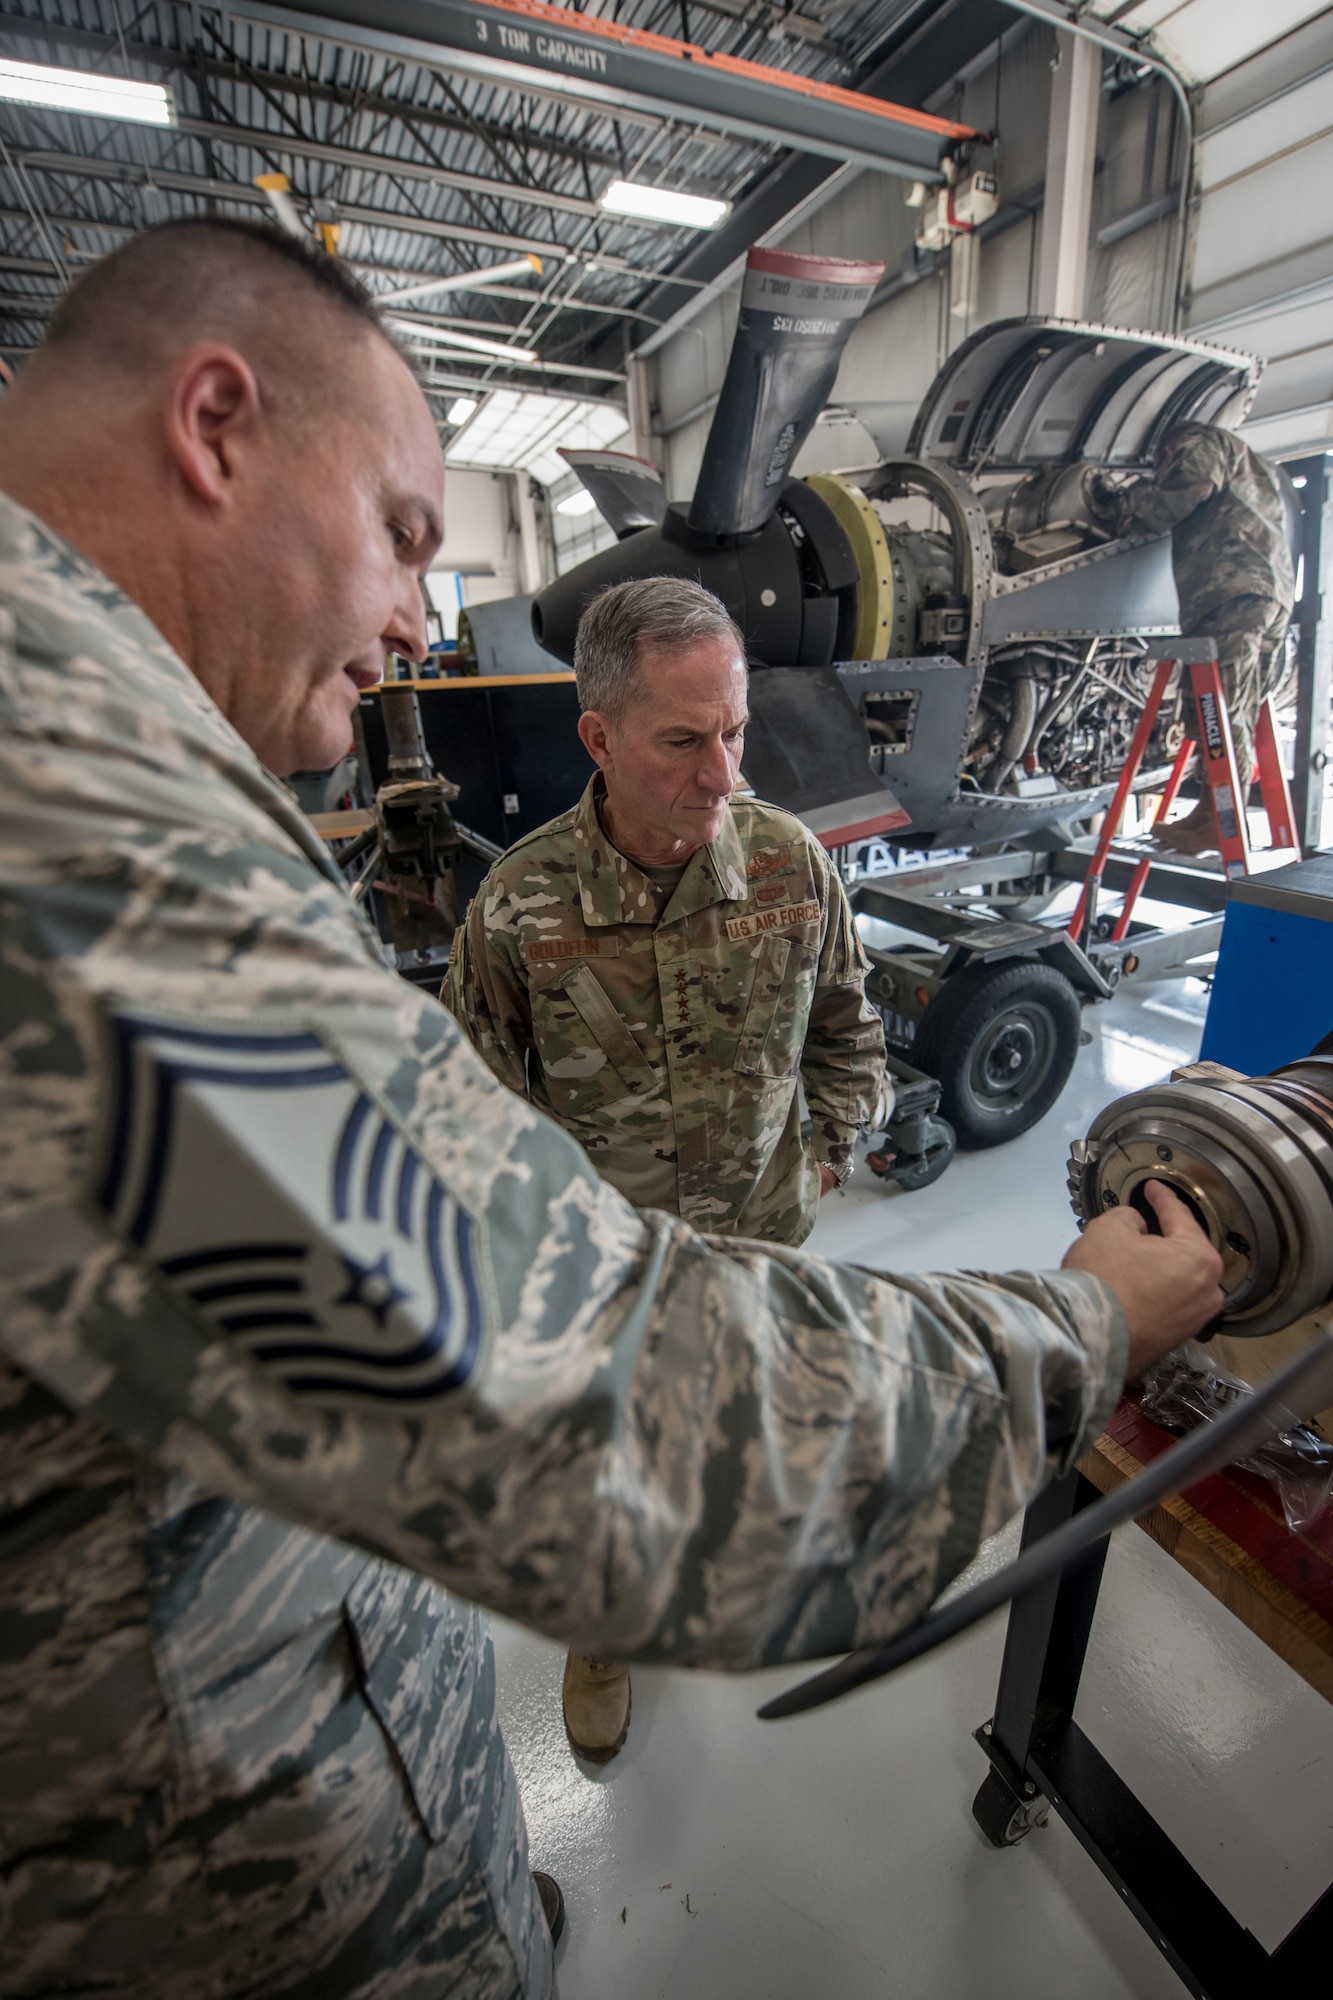 Senior Master Sgt. John Wardrip (left), propulsion element supervisor for the 123rd Maintenance Group, speaks with Air Force Chief of Staff Gen. David L. Goldfein during a tour of the Kentucky Air National Guard Base in Louisville, Ky., Aug. 10, 2019. Goldfein visited various work centers, learning about the unique mission sets of the 123rd Airlift Wing. (U.S. Air National Guard photo by Staff Sgt. Joshua Horton)